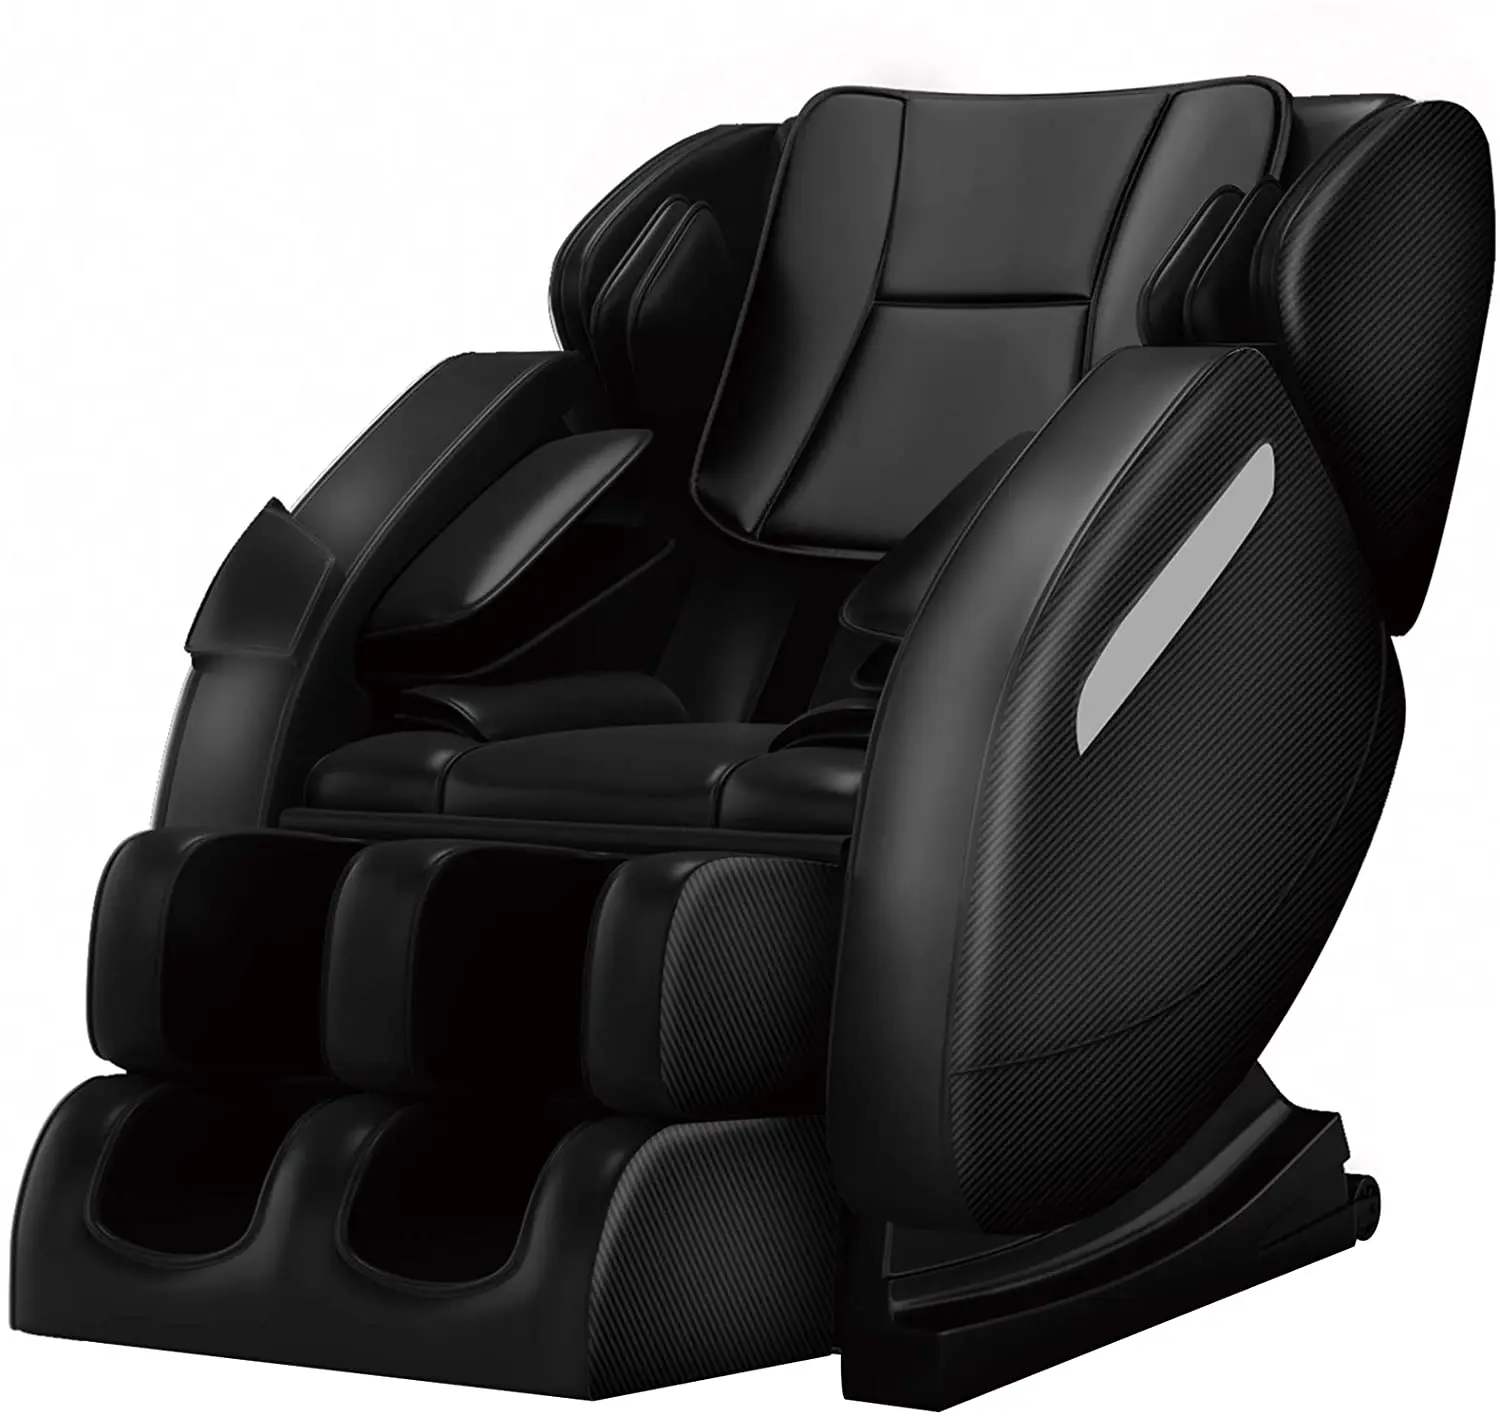 Full Body Sex Human Touch India Inflatable Kids Hypnotherapy Pedicure Game Chair Genuine Leather Luxury 4 D Massage Chair Buy Inflatable Kids Hypnotherapy Pedicure Game Chair Genuine Leather Luxury 4 D